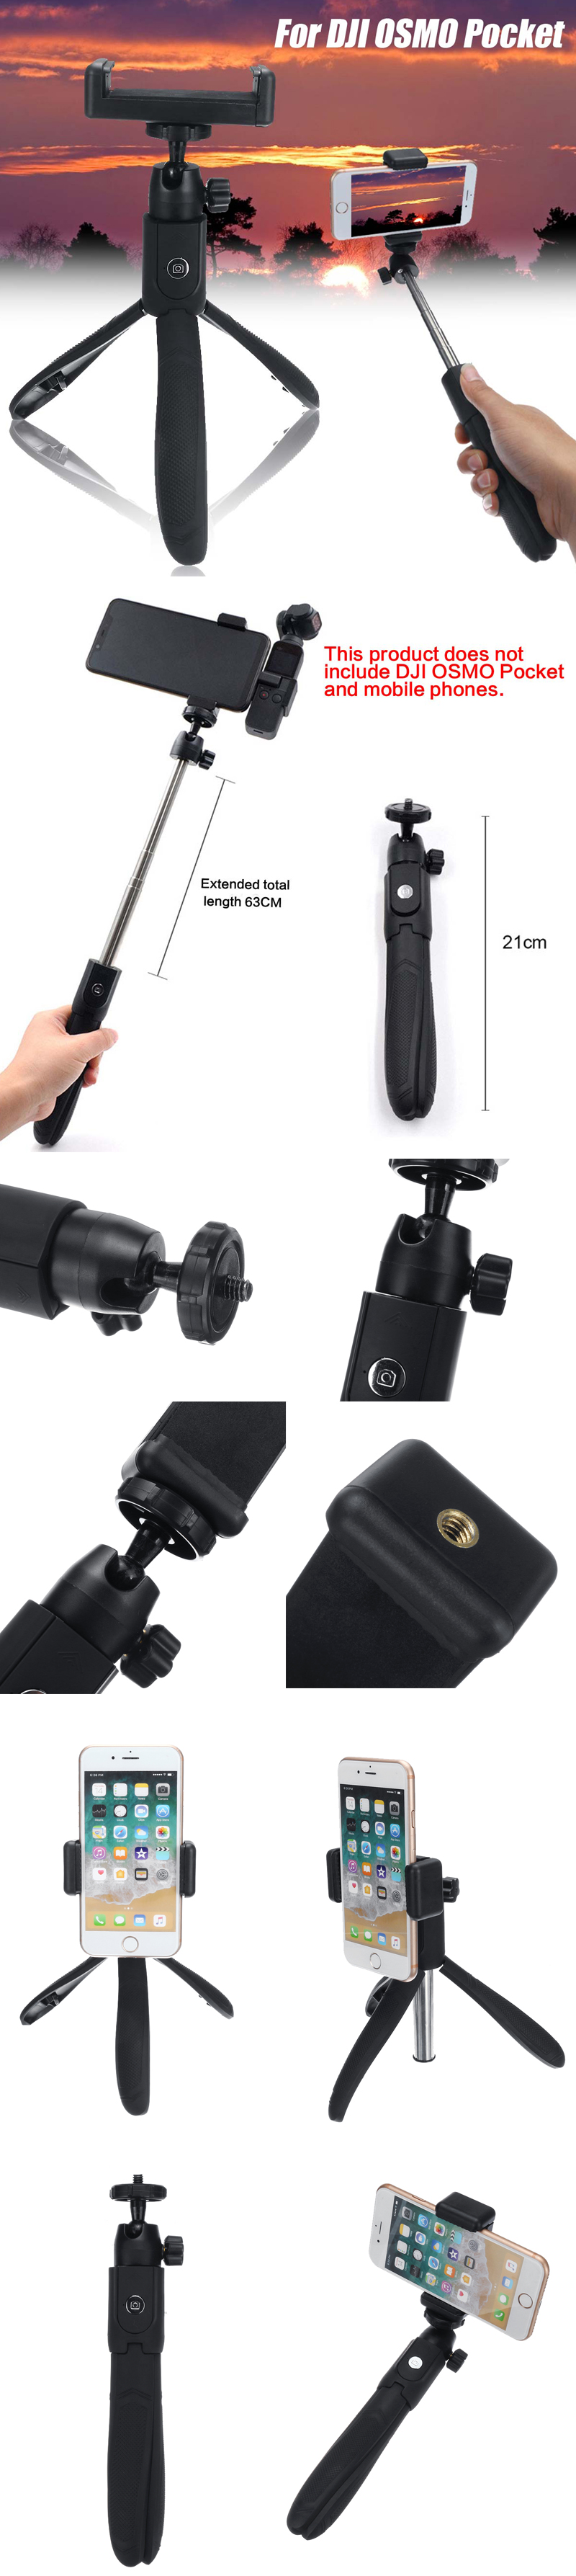 bluetooth-Selfie-Stick-For-DJI-OSMO-Pocket-Phone-Holder-Gimbal-Stabilizer-Outdoor-Hunting-Accessorie-1423742